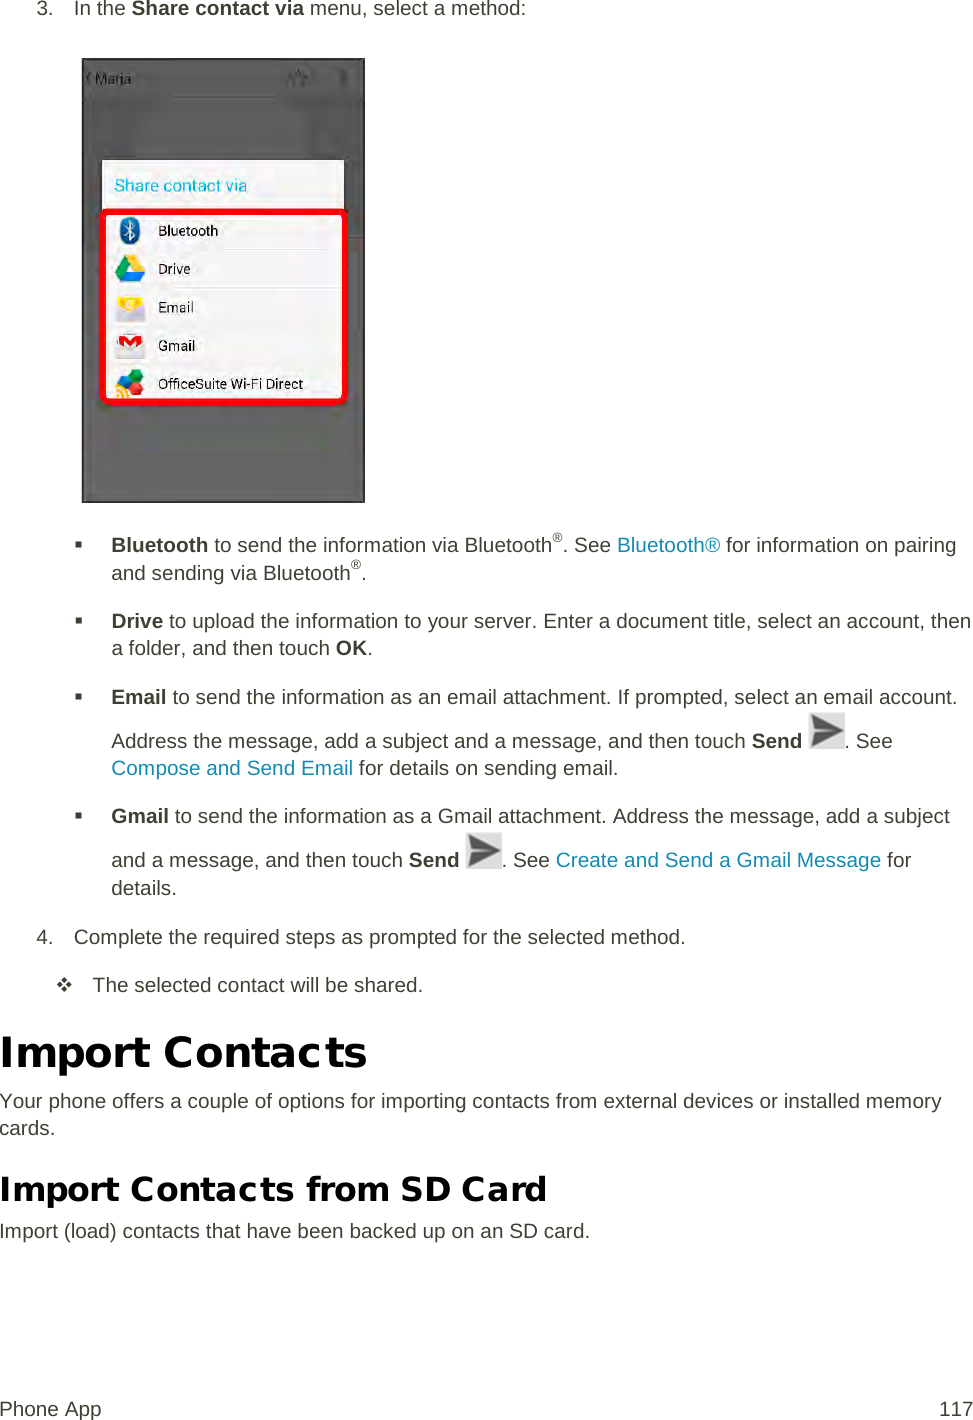 3. In the Share contact via menu, select a method:    Bluetooth to send the information via Bluetooth®. See Bluetooth® for information on pairing and sending via Bluetooth®.  Drive to upload the information to your server. Enter a document title, select an account, then a folder, and then touch OK.  Email to send the information as an email attachment. If prompted, select an email account. Address the message, add a subject and a message, and then touch Send . See Compose and Send Email for details on sending email.  Gmail to send the information as a Gmail attachment. Address the message, add a subject and a message, and then touch Send . See Create and Send a Gmail Message for details. 4. Complete the required steps as prompted for the selected method.  The selected contact will be shared. Import Contacts Your phone offers a couple of options for importing contacts from external devices or installed memory cards. Import Contacts from SD Card Import (load) contacts that have been backed up on an SD card. Phone App 117 